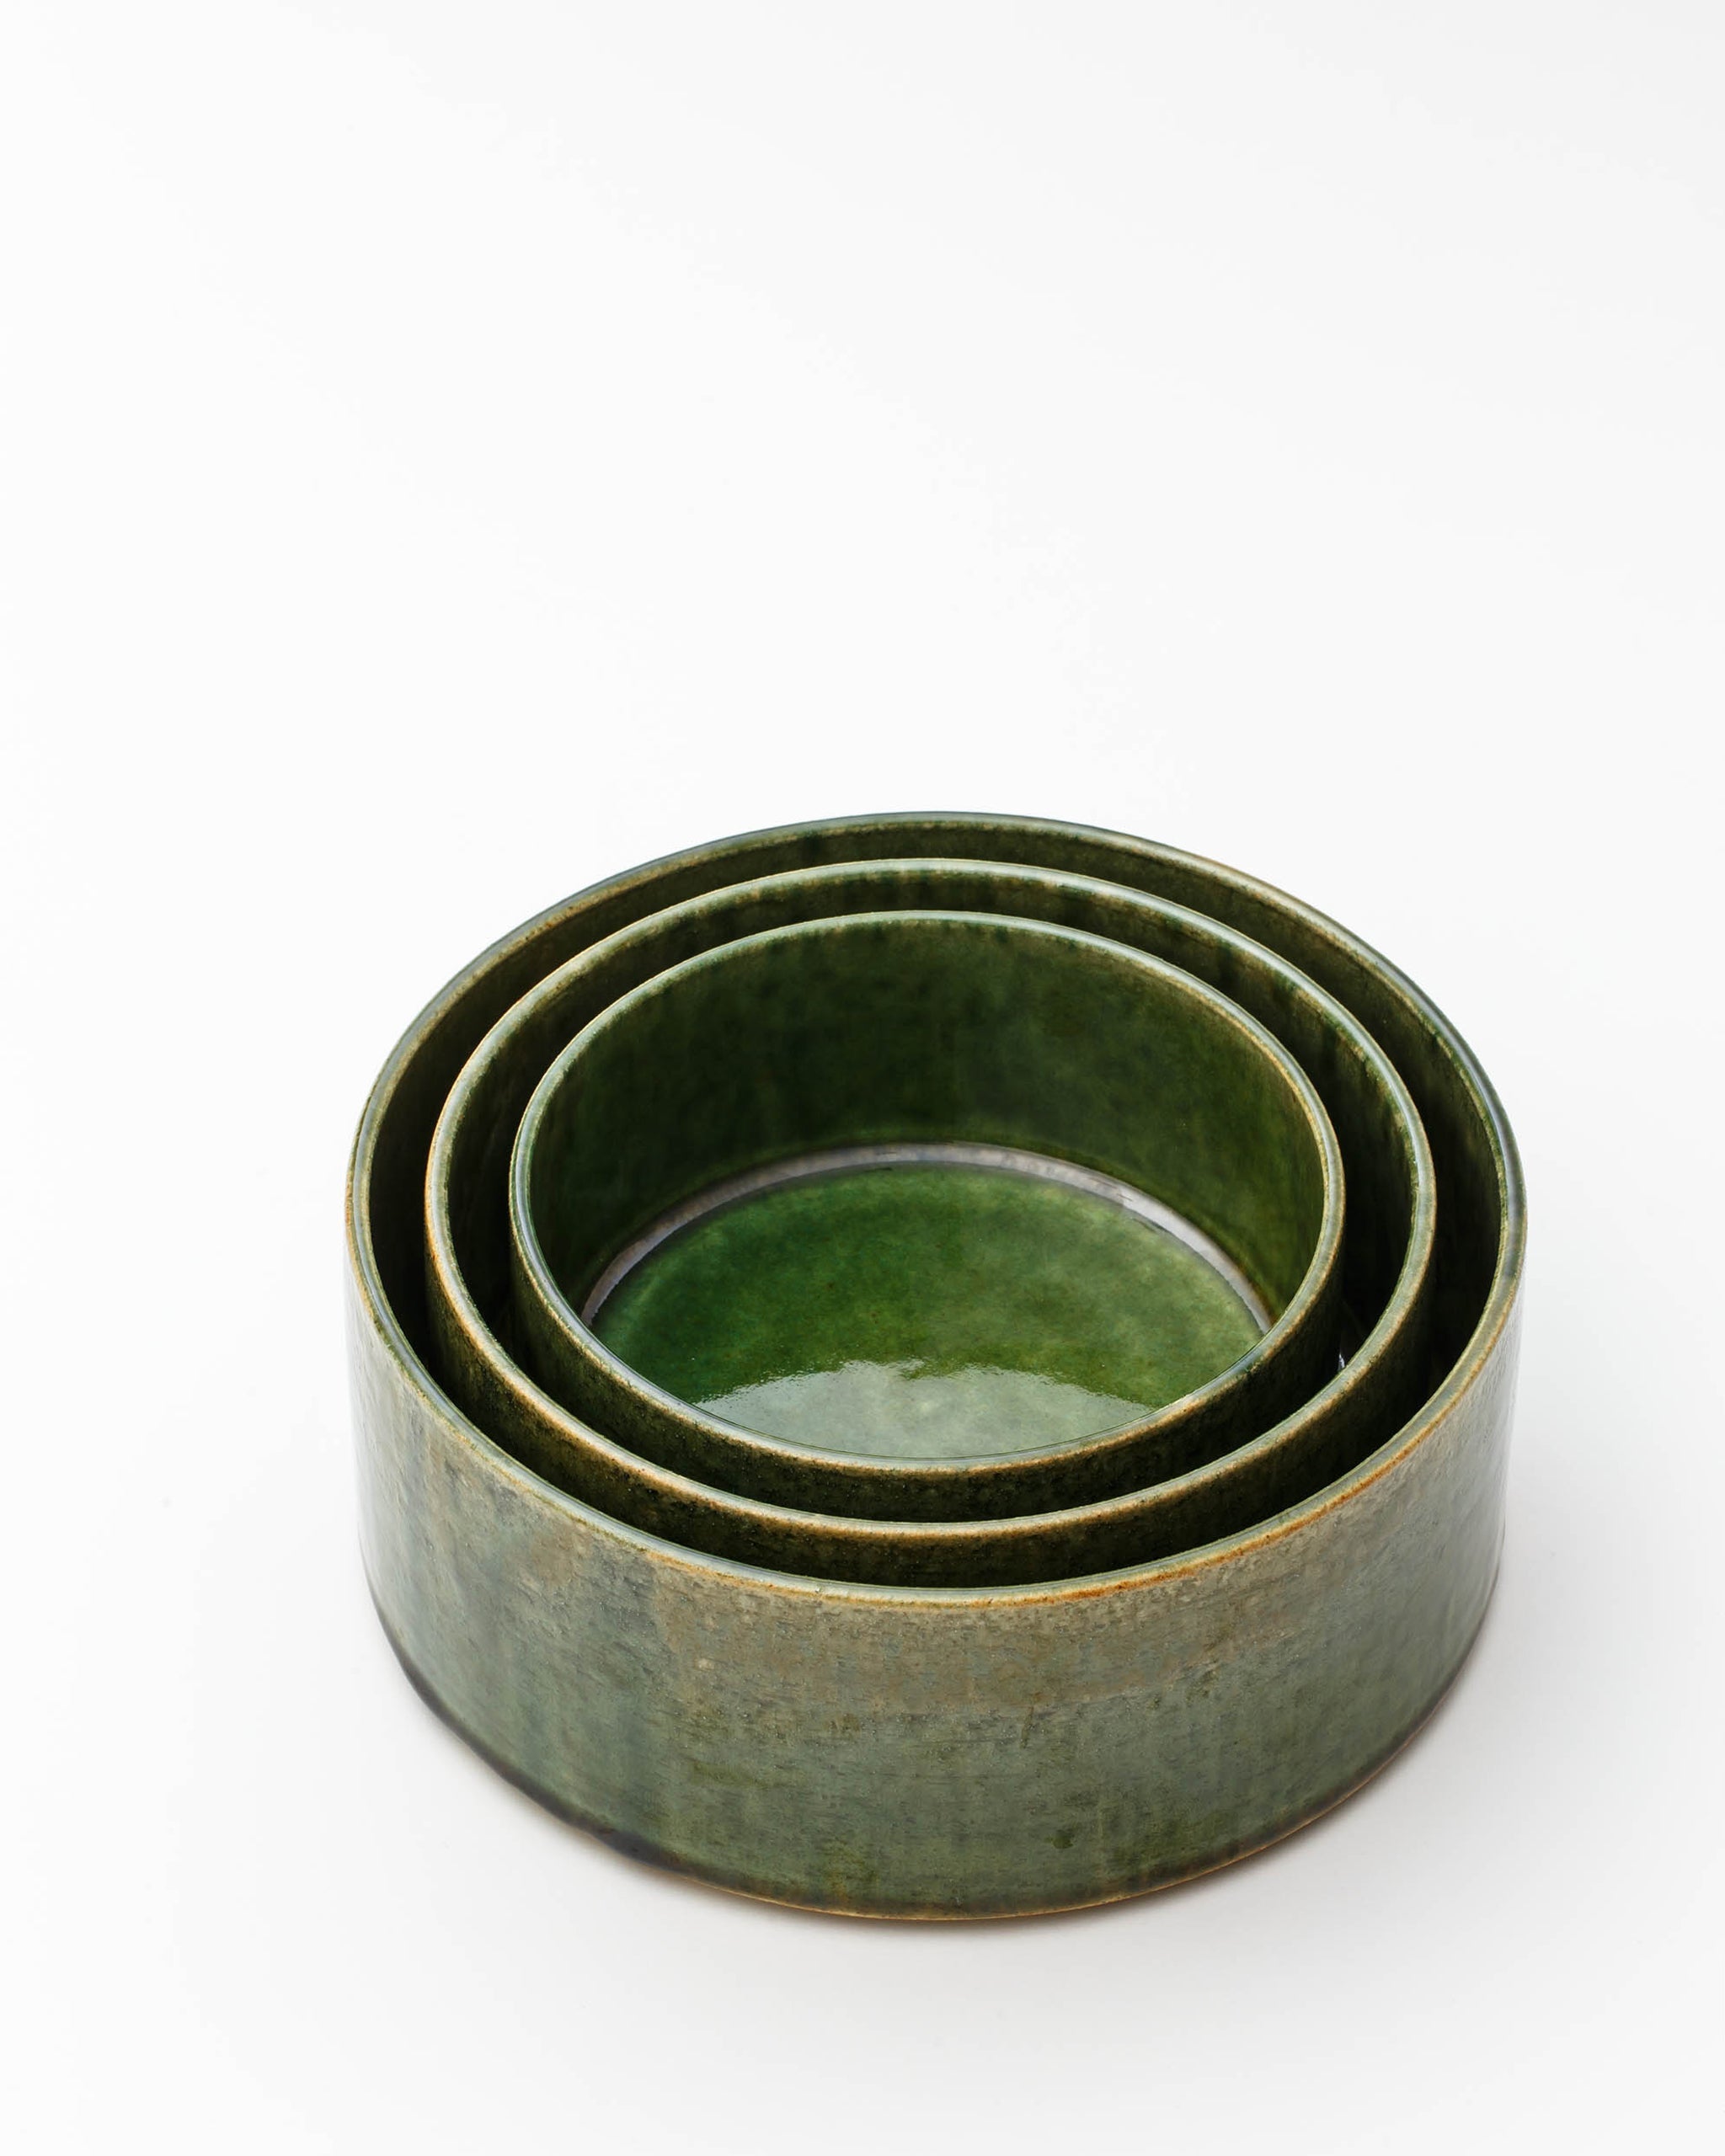 Silhouetted image of stacked small, medium, and large ceramic oribe bowls with deep green glaze by Time and Style against white-gray background.